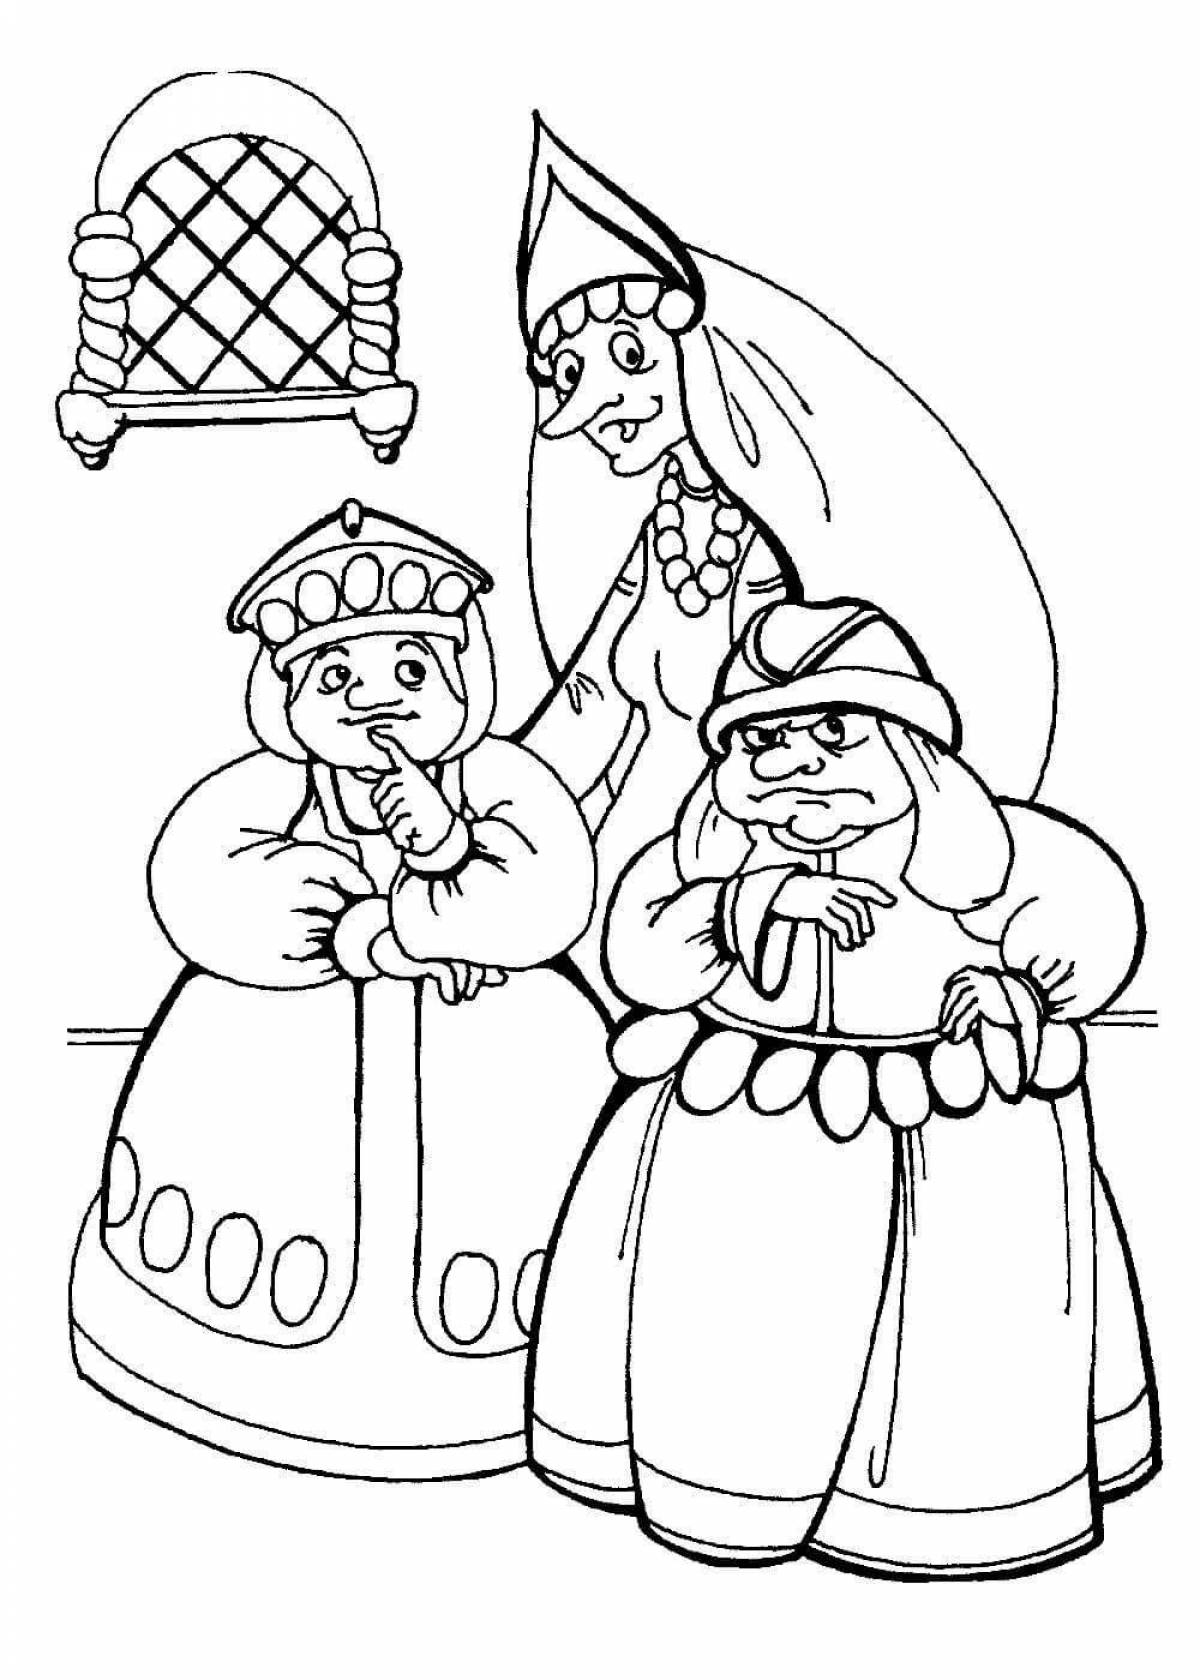 A fascinating coloring book based on Pushkin's fairy tales